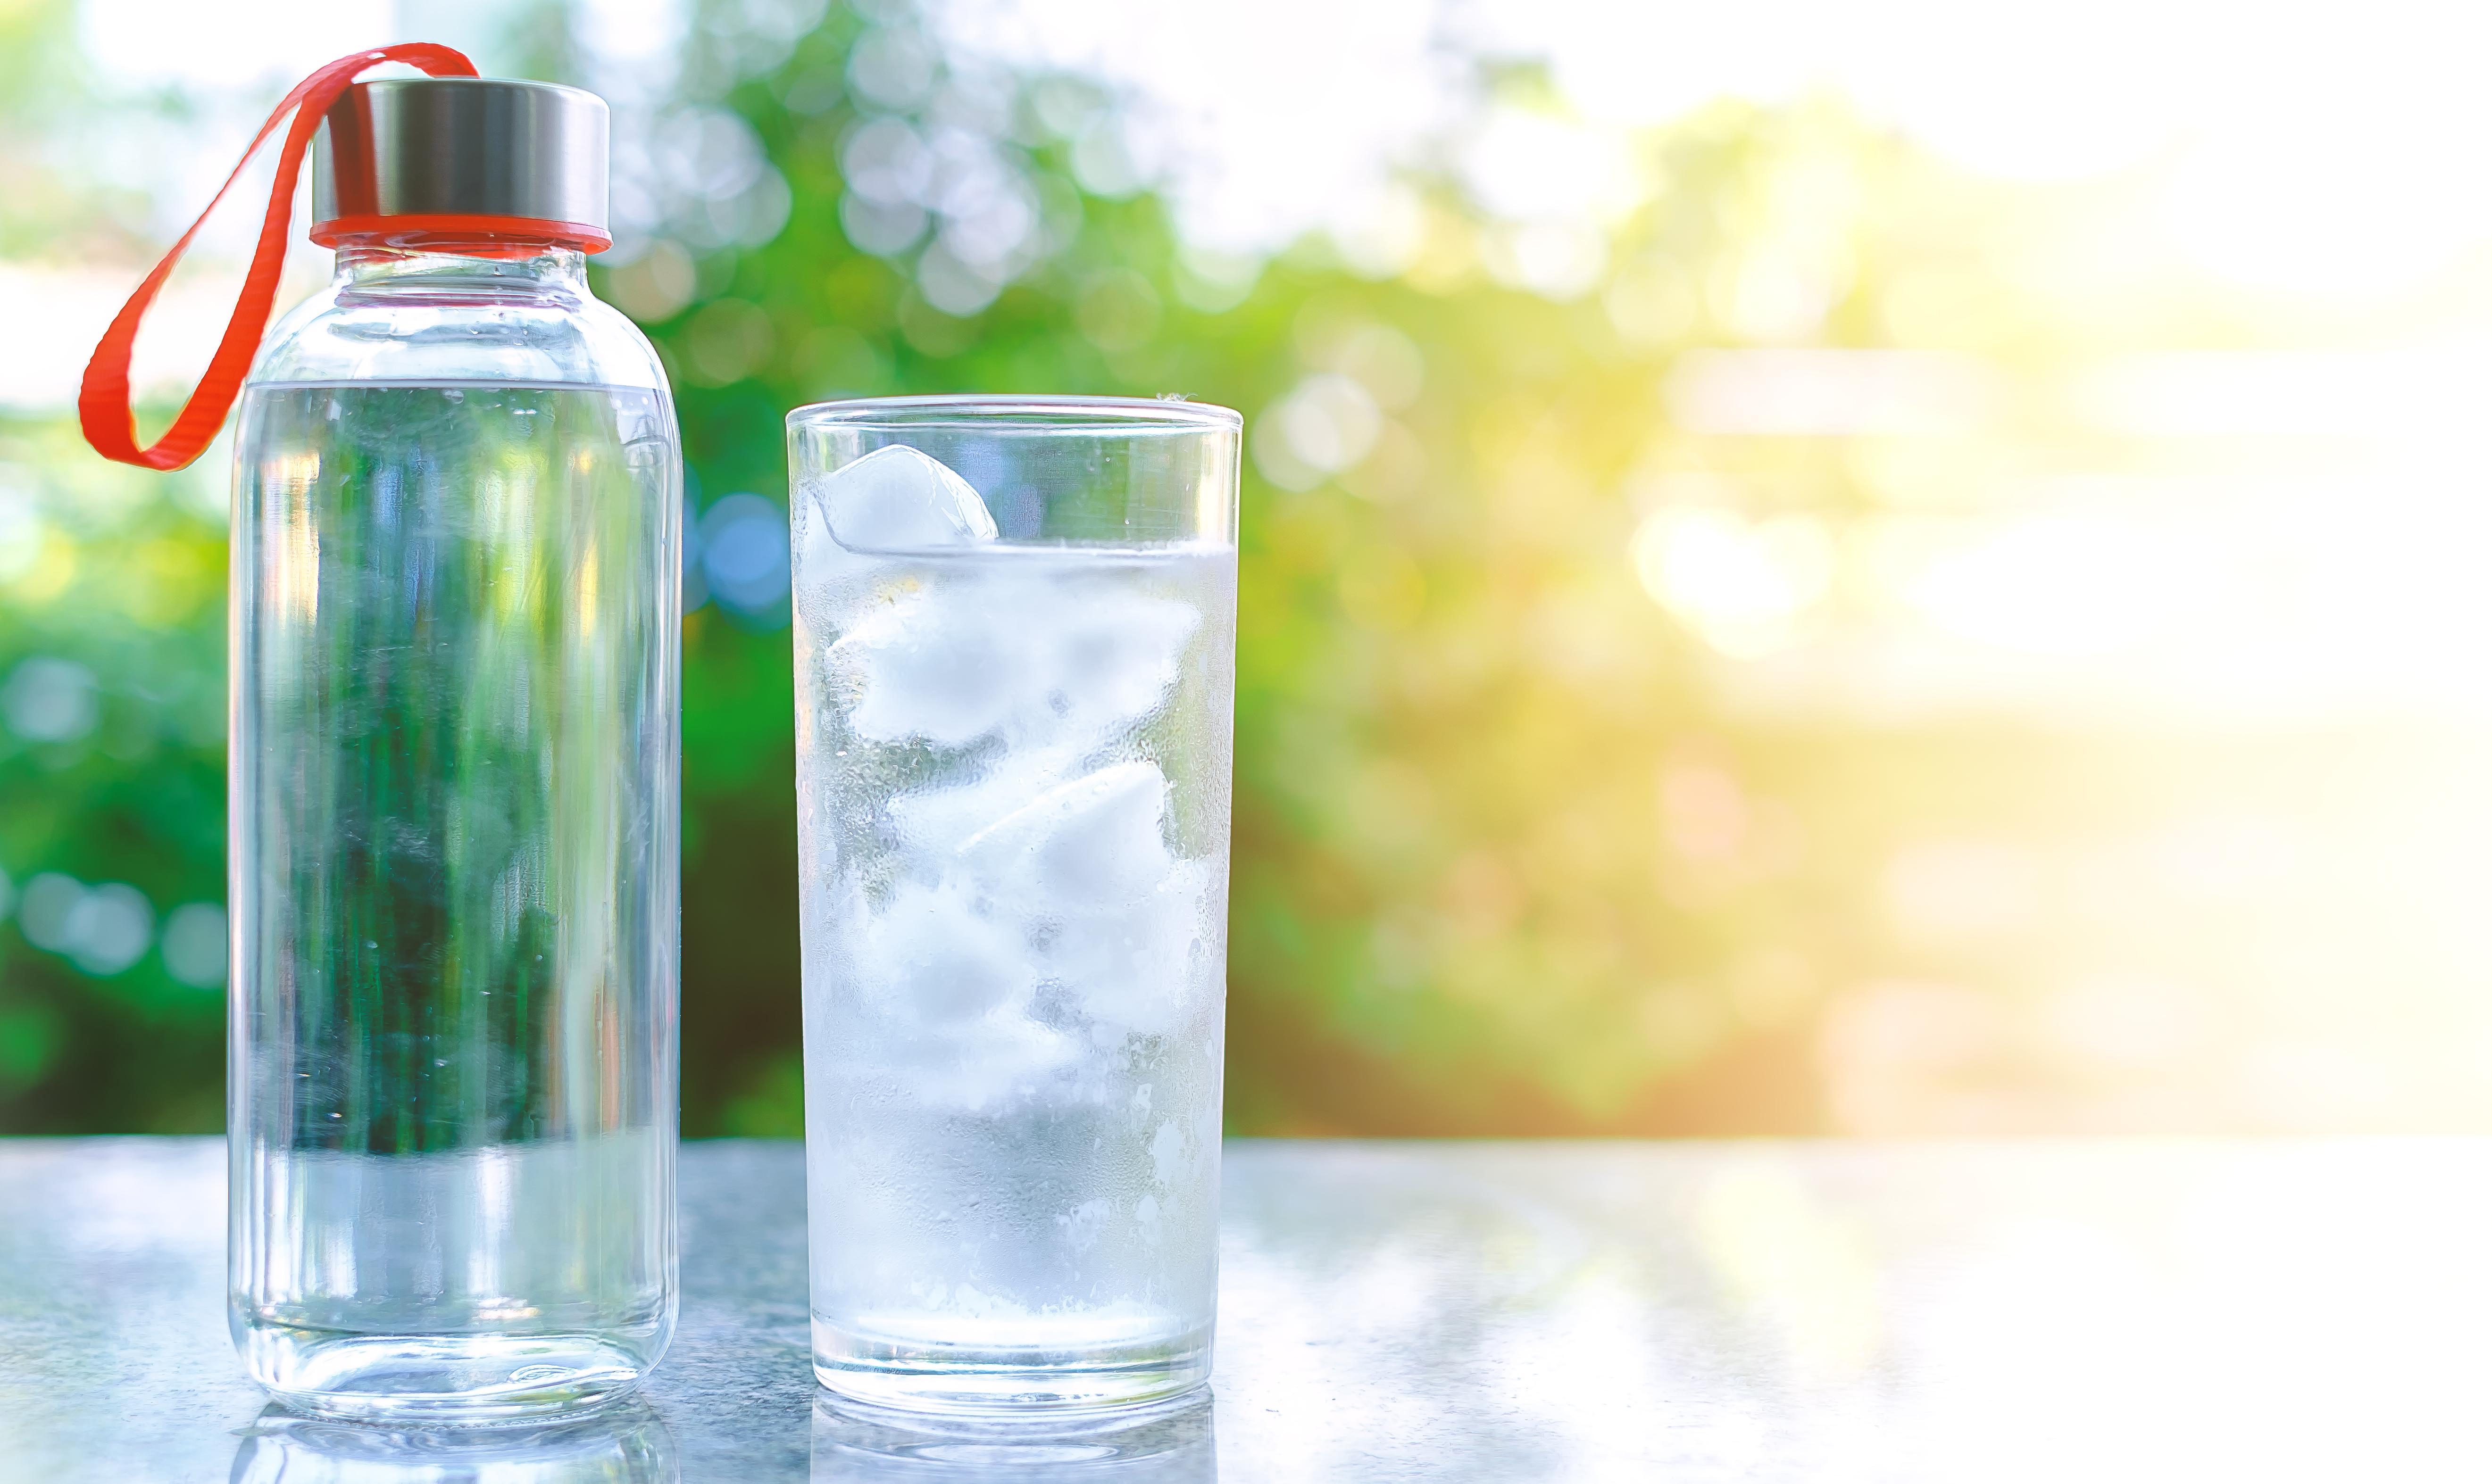 Cold Water Vs Room Temperature Water: When Should You Drink Them?